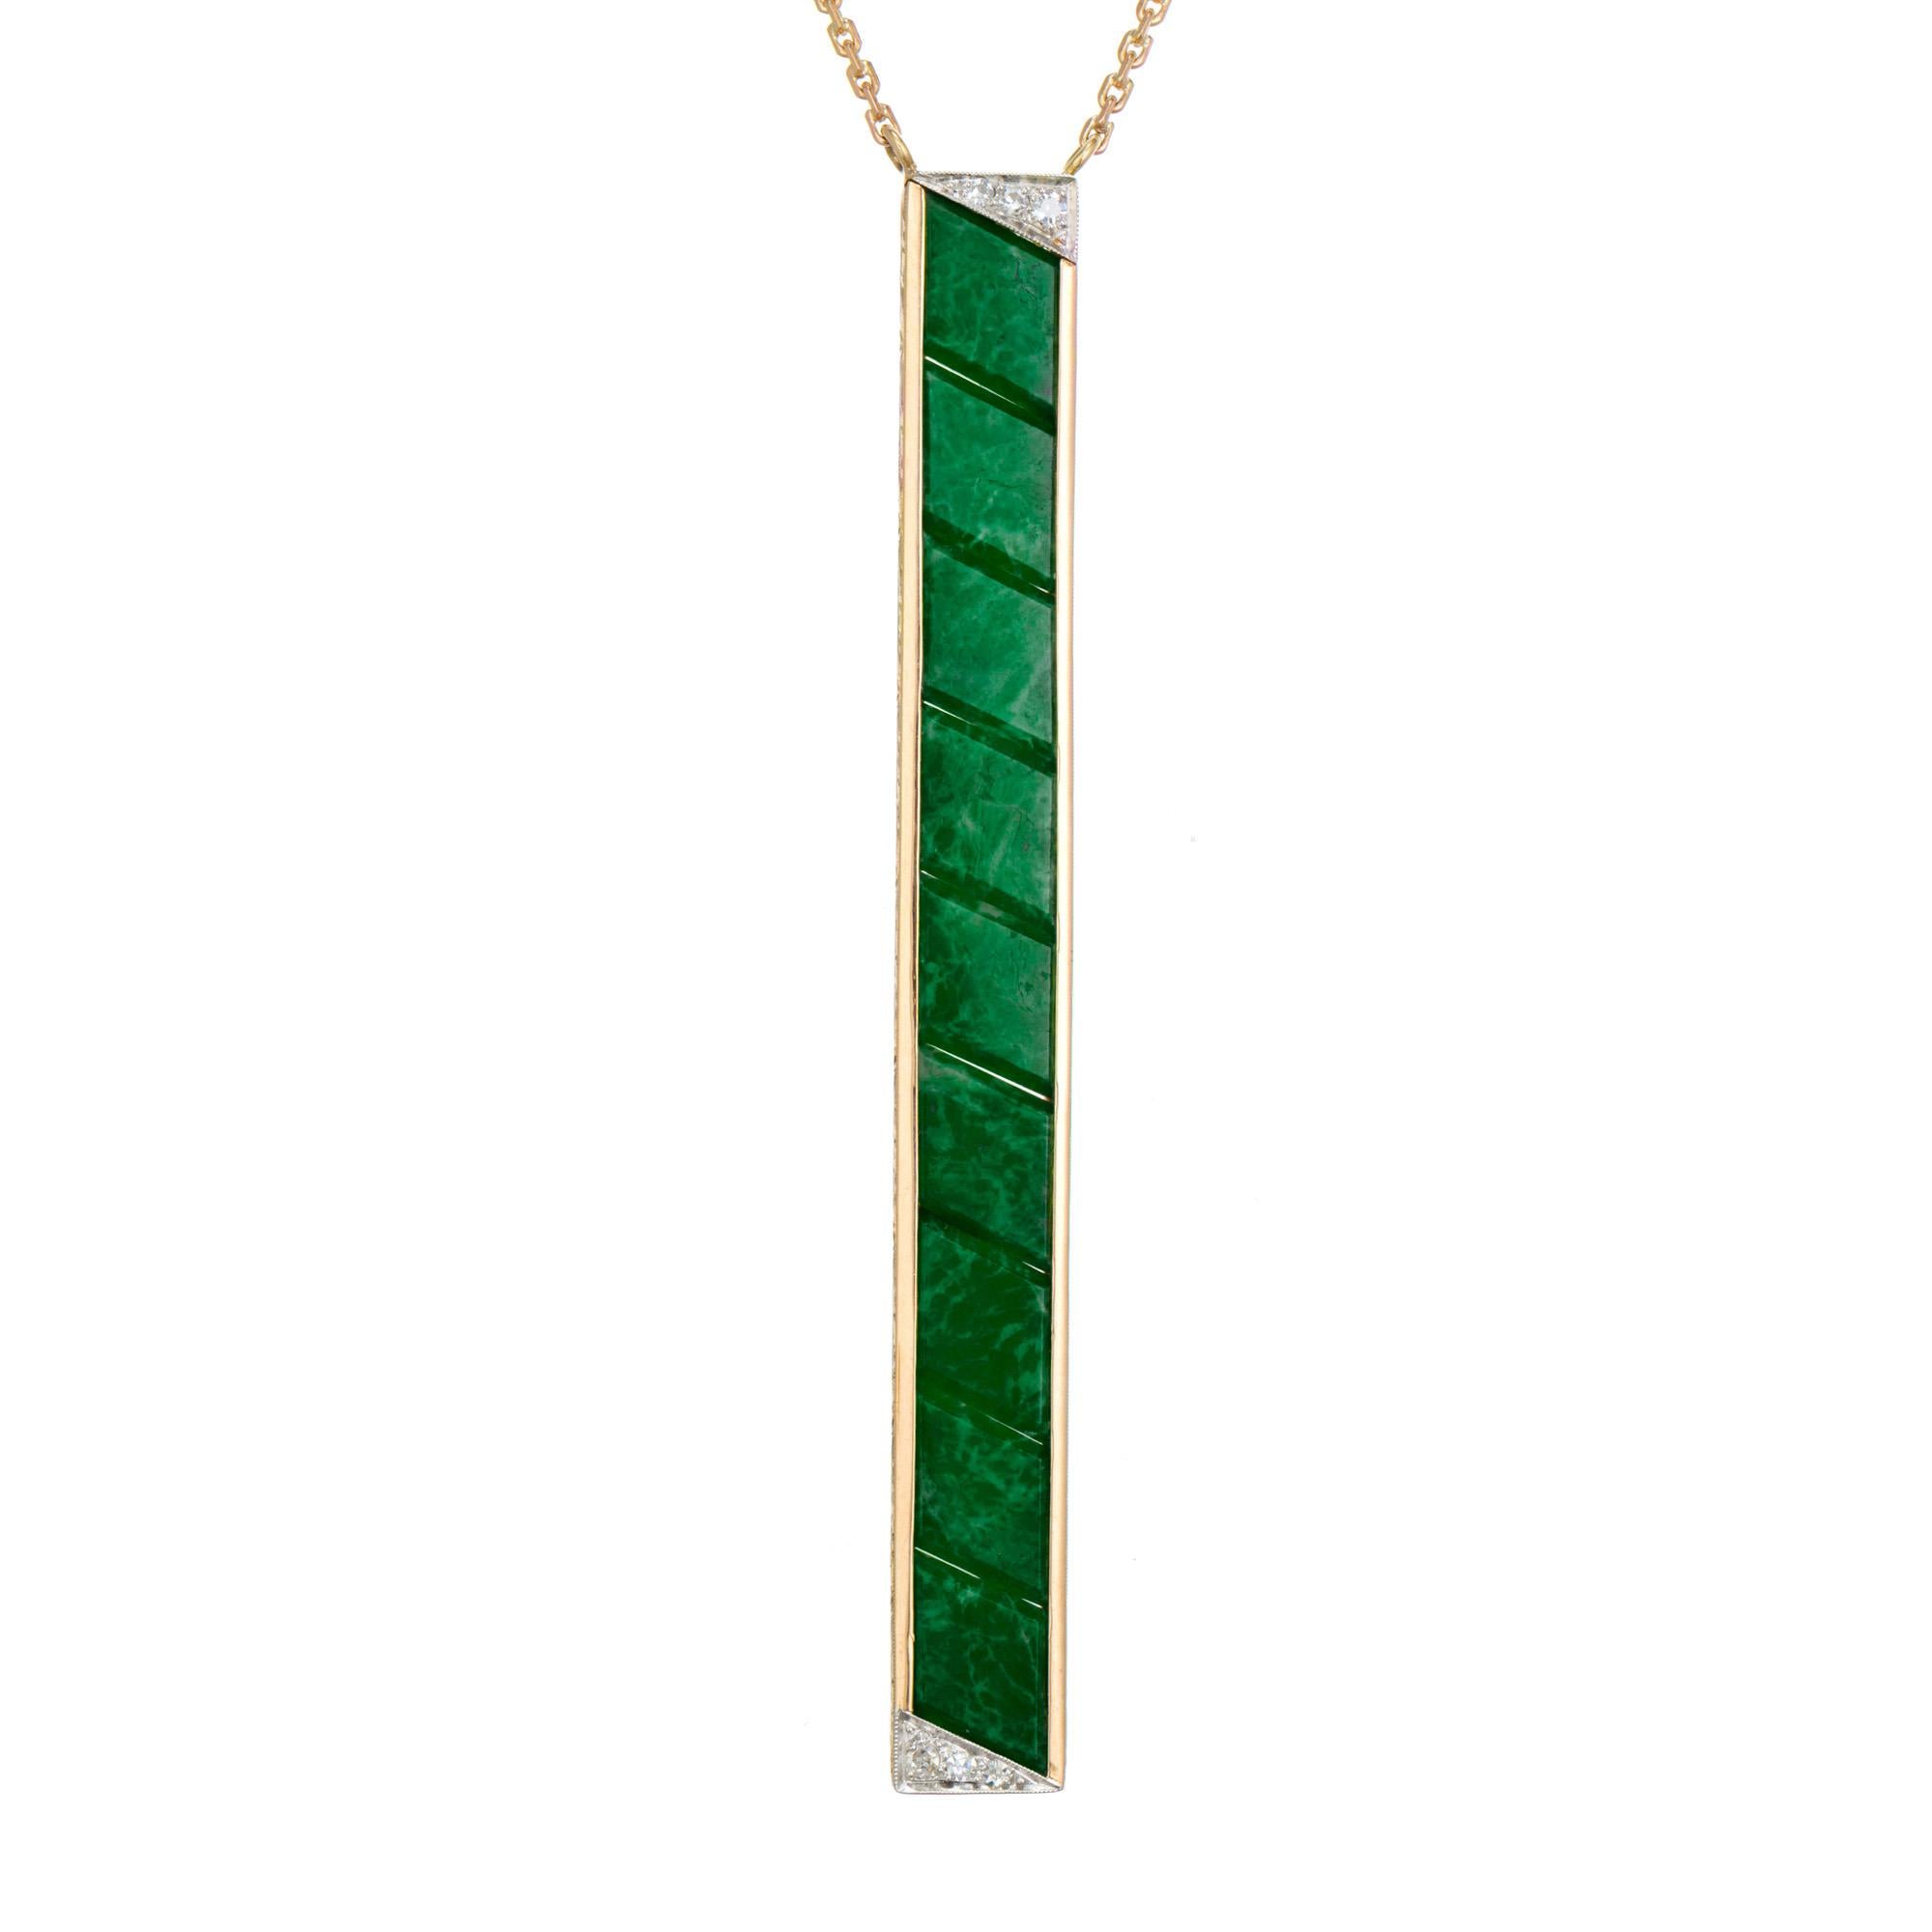 Art Deco Jadeite Jade pendant necklace. GIA certified green natural Lozenge tablet cut Jadeite Jade long bar pendant framed in 14k yellow gold and with platinum corners accented with 3 single cut diamonds in each corner. Certified by the GIA as